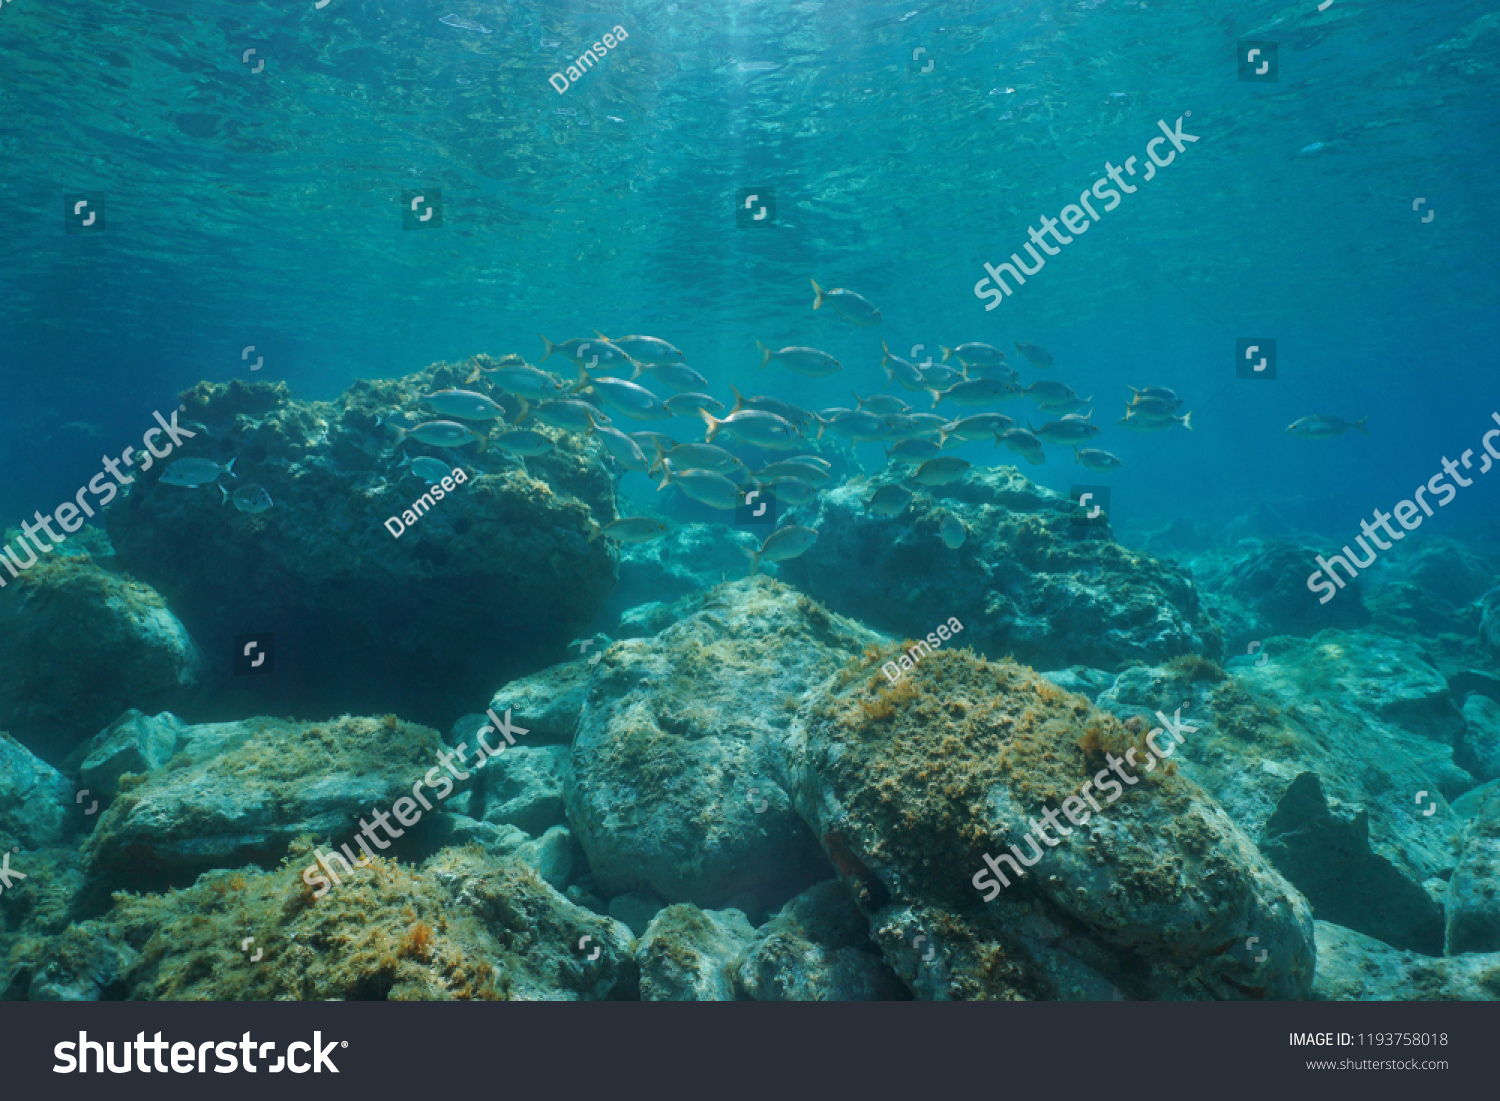 Underwater seascape fish school between rocky bottom and water surface in the Mediterranean sea #1193758018